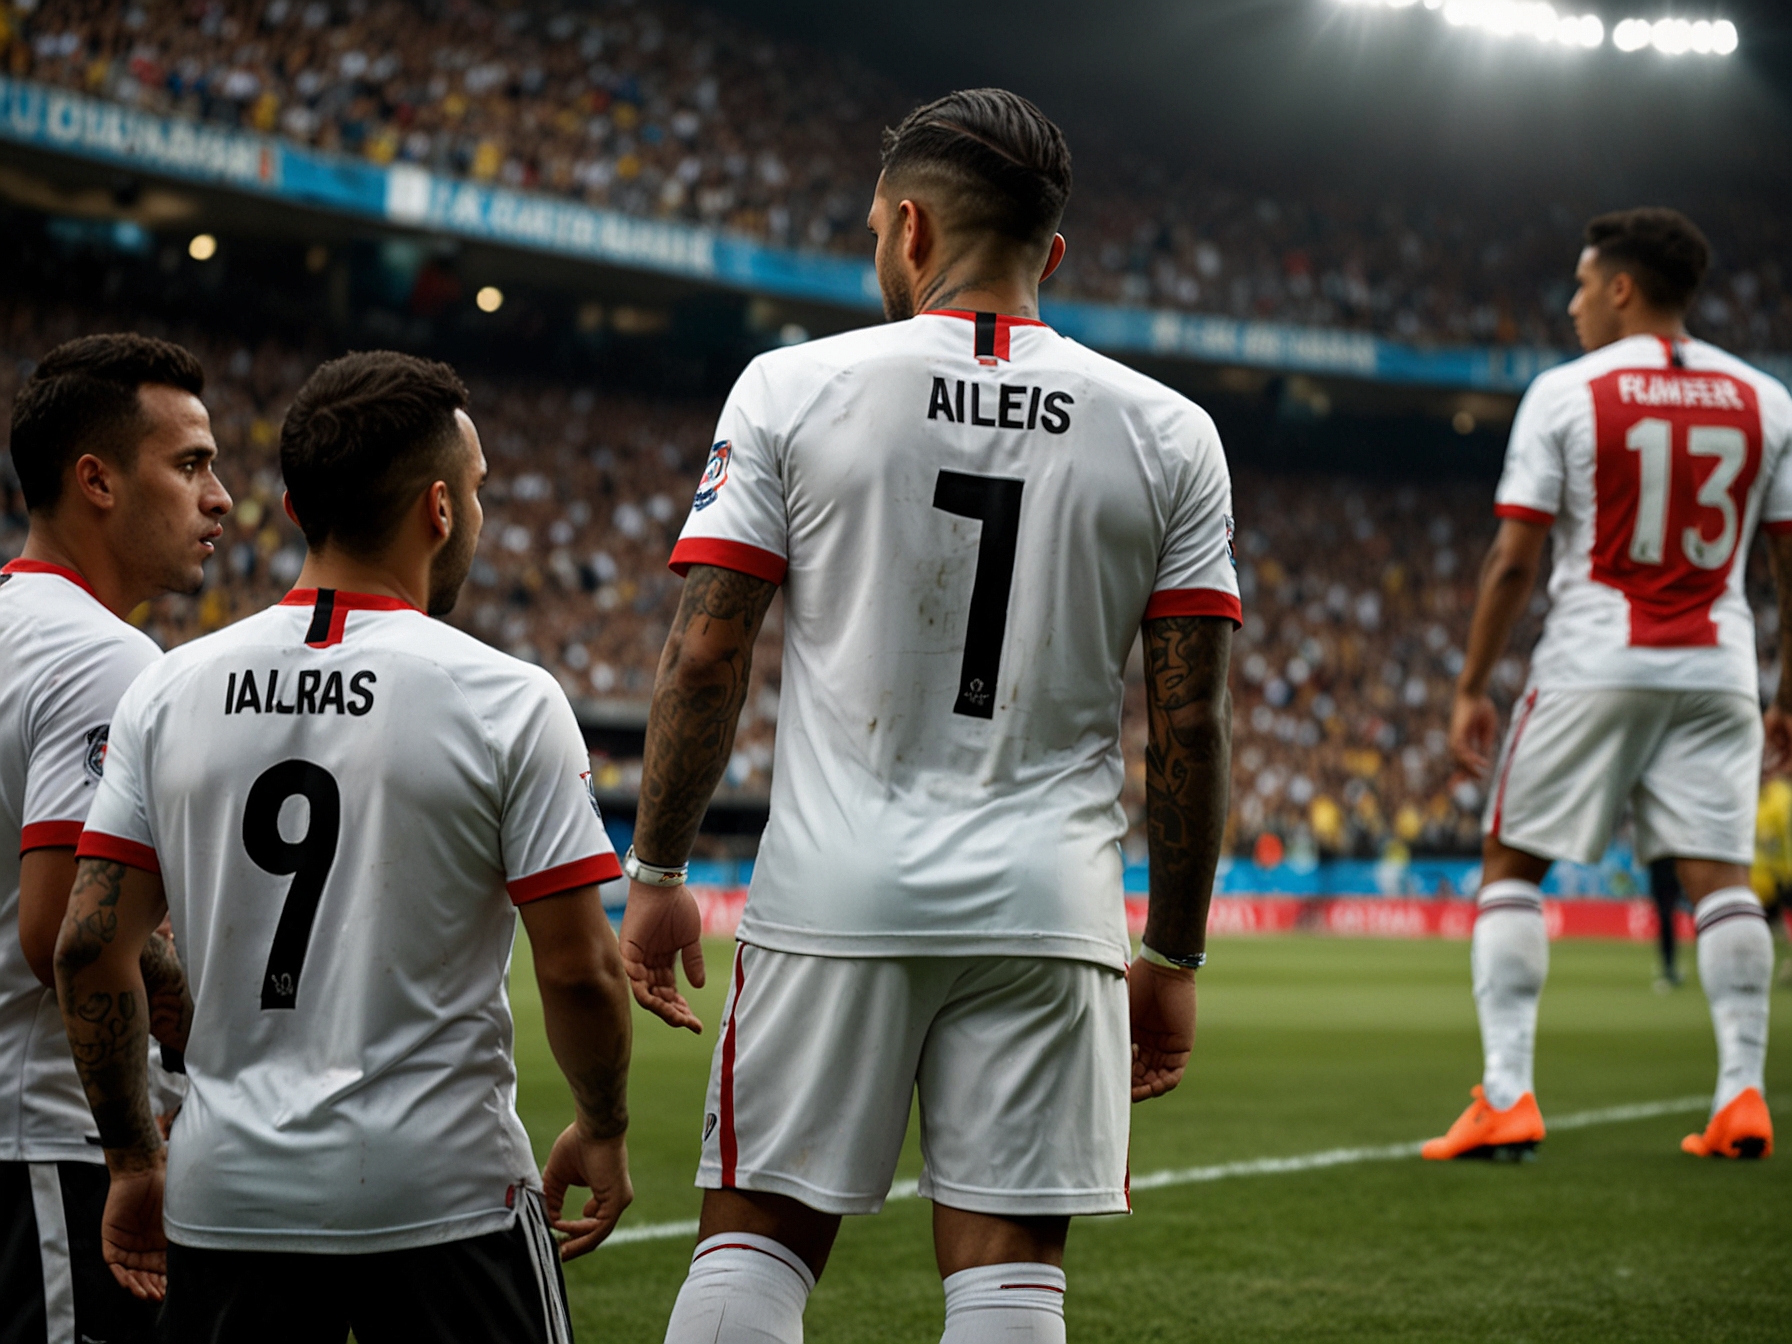 A tense moment during a Brasileiro match with Sao Paulo players, including Dani Alves, strategizing on the field. The crowd is highly engaged, showing their unwavering support for the home team.